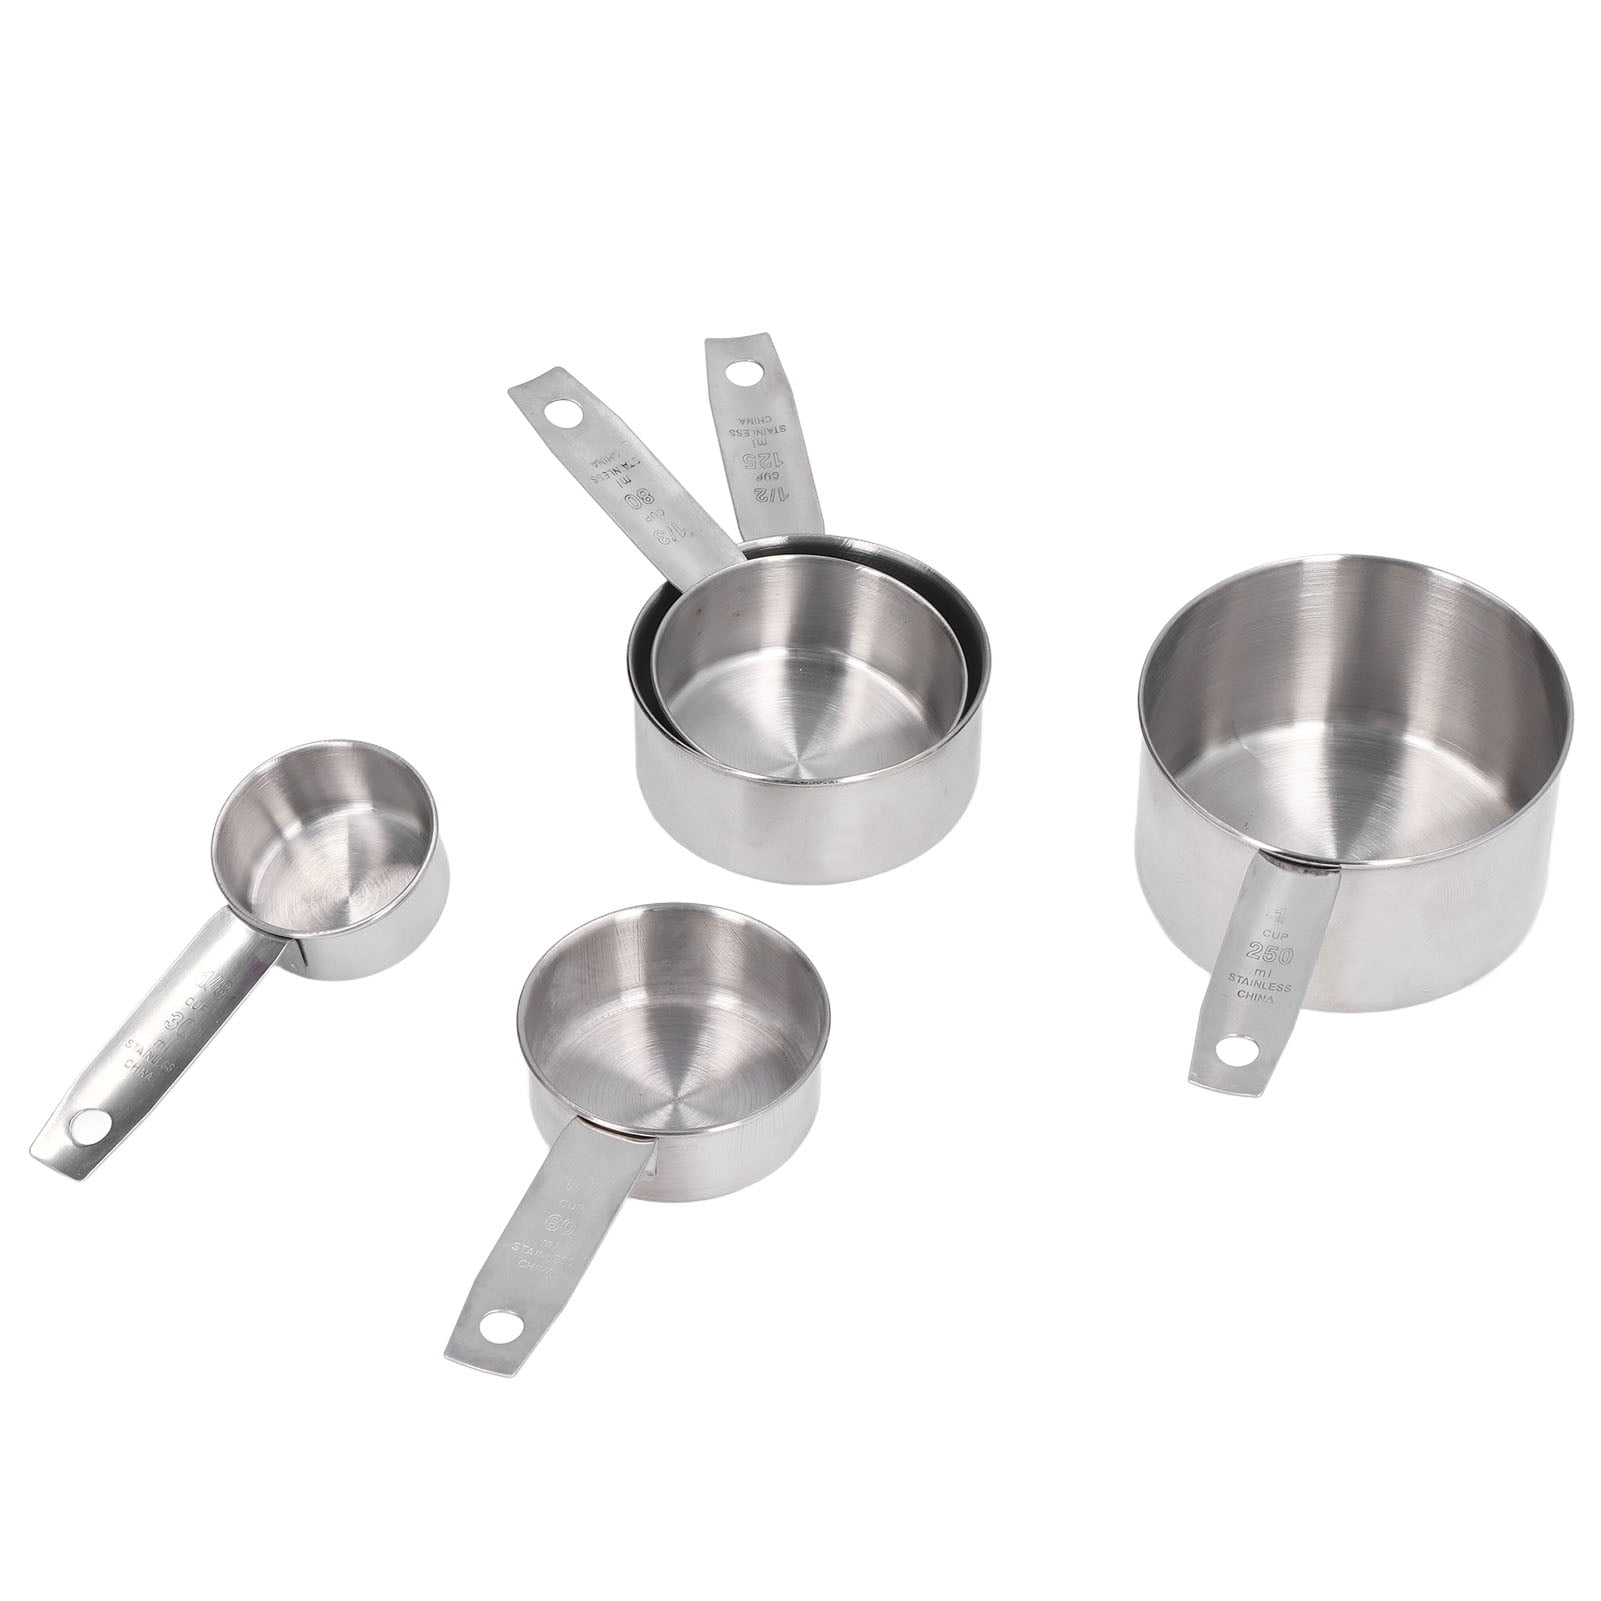 HUBERT® Stainless Steel Measuring Cup Set with Standard Strip